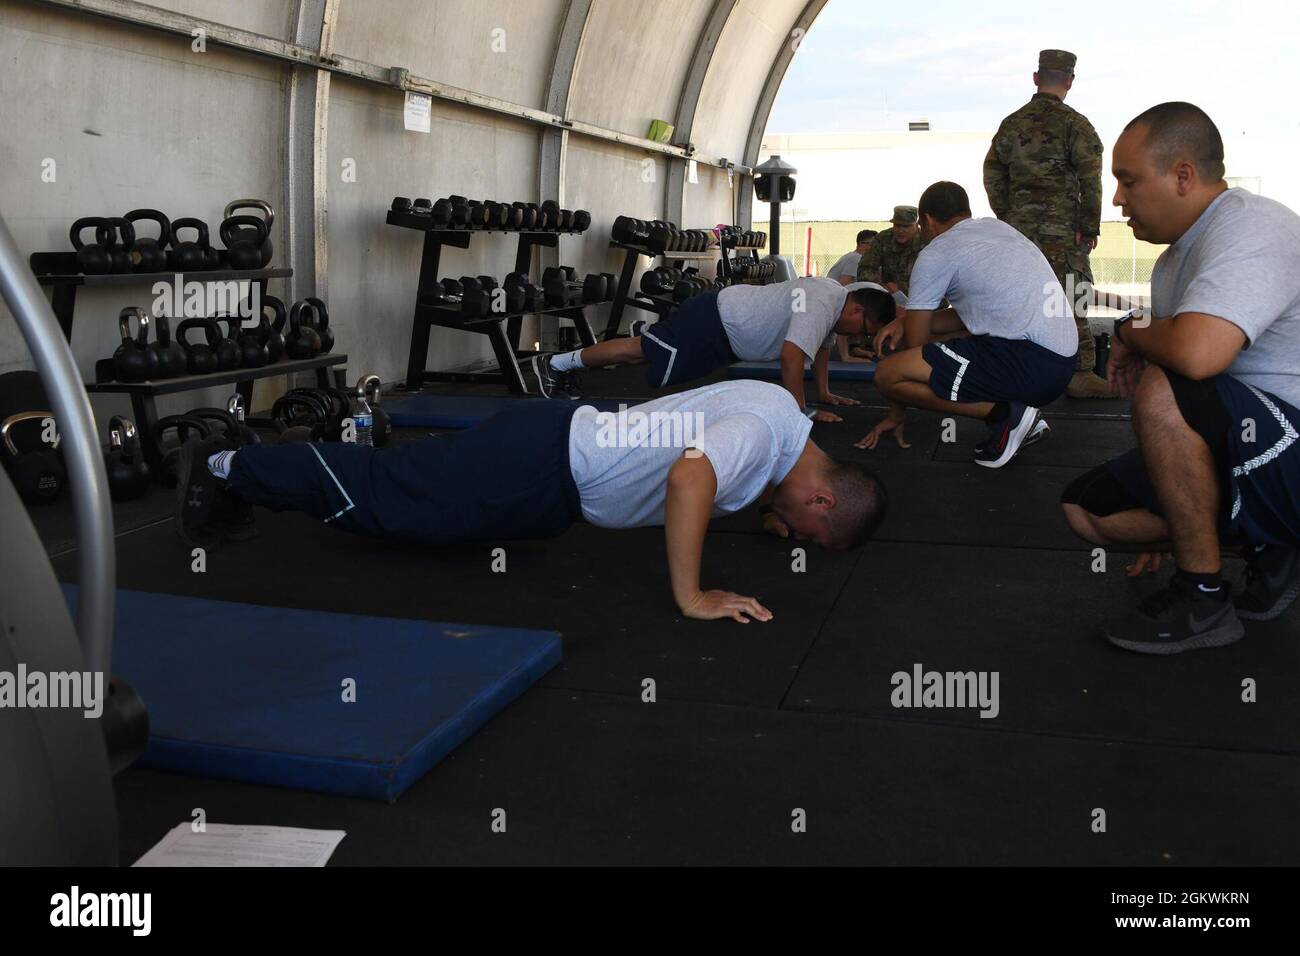 U.S. Air Force Airmen at the 144th Fighter Wing complete the push-ups  portion of the Air Force physical fitness test July 11, 2021, at the Fresno  Air National Guard Base, Calif. Components